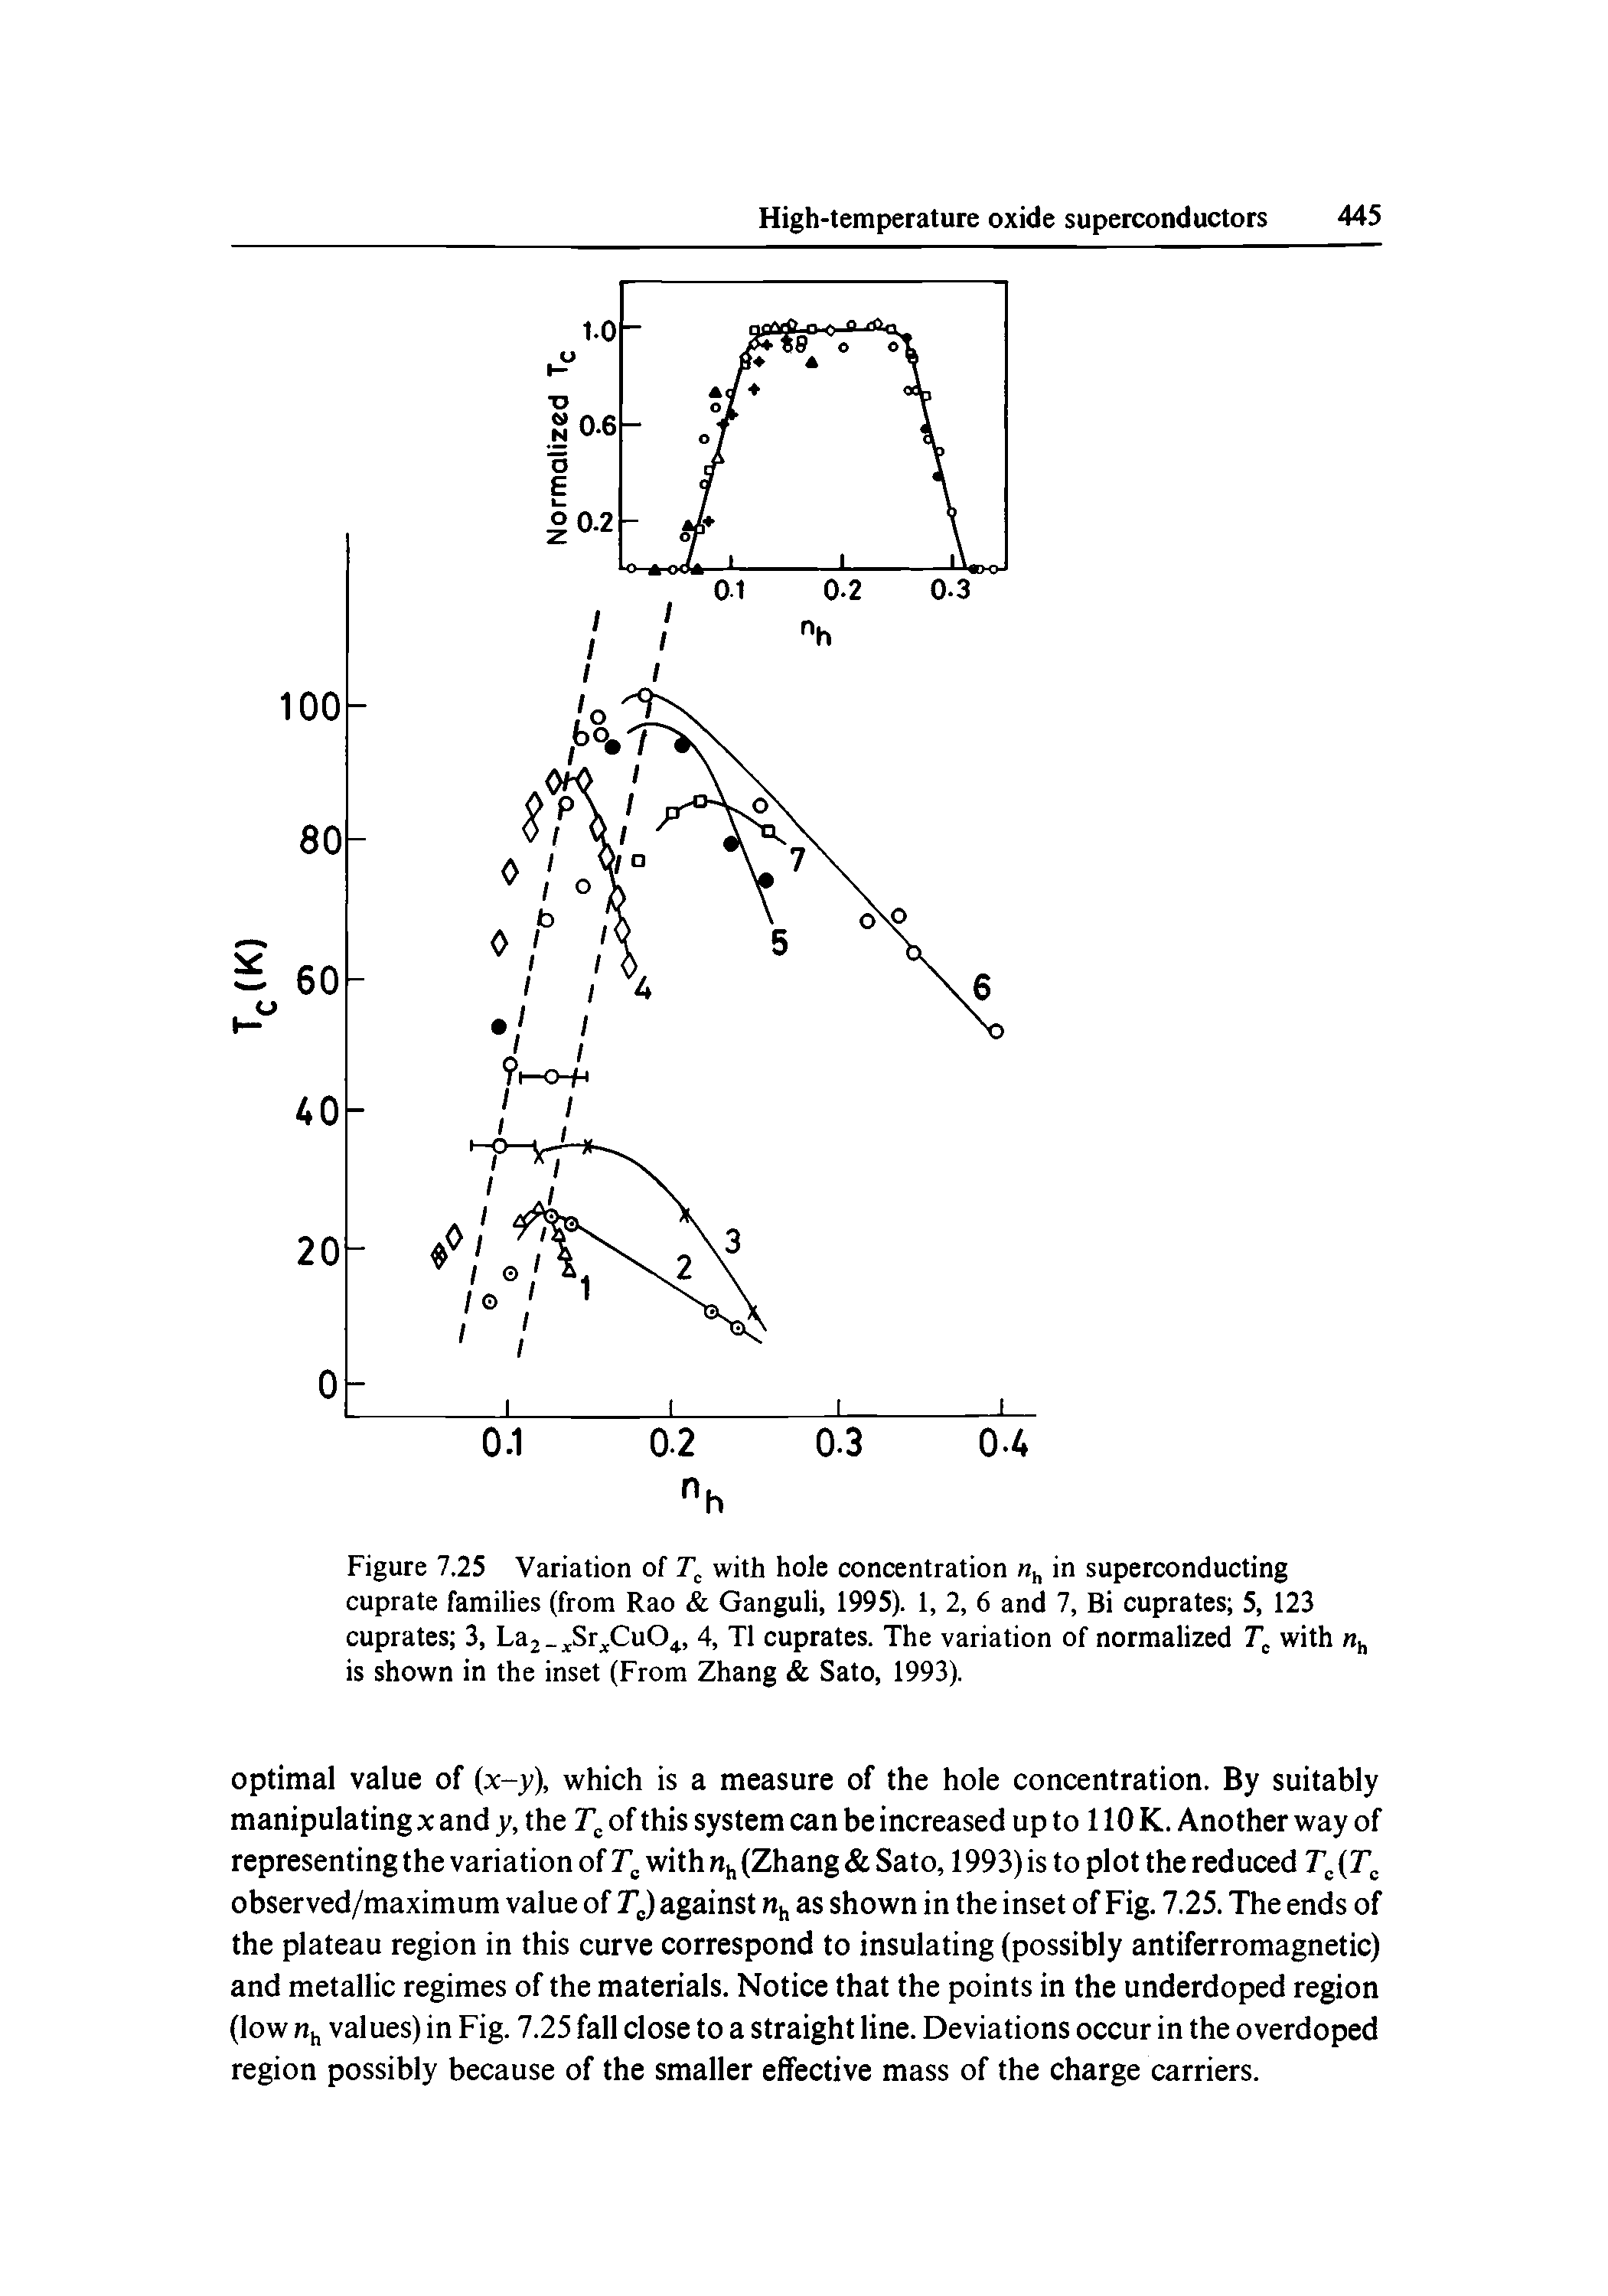 Figure 7.25 Variation of with hole concentration in superconducting cuprate families (from Rao Ganguli, 1995). 1, 2, 6 and 7, Bi cuprates 5, 123 cuprates 3, Laj- Sr CuO, 4, T1 cuprates. The variation of normalized with is shown in the inset (From Zhang Sato, 1993).